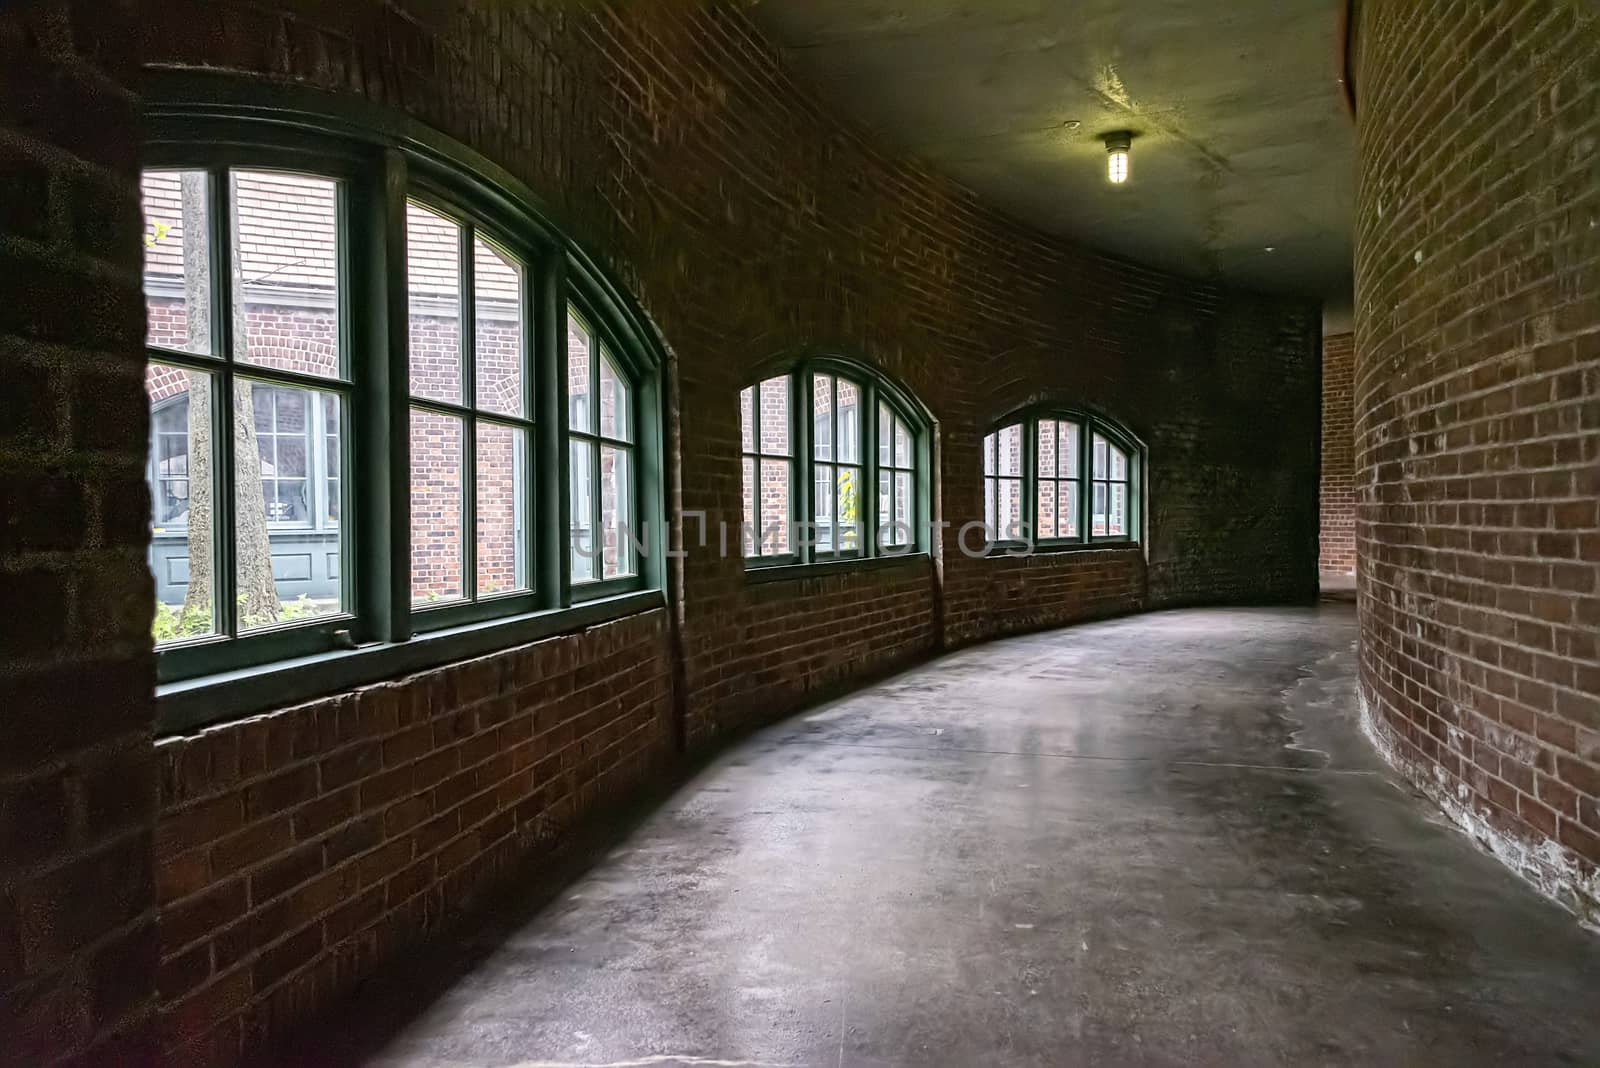 USA, New York, Ellis Island - May 2019: Long curved corridor walled with arched window panels